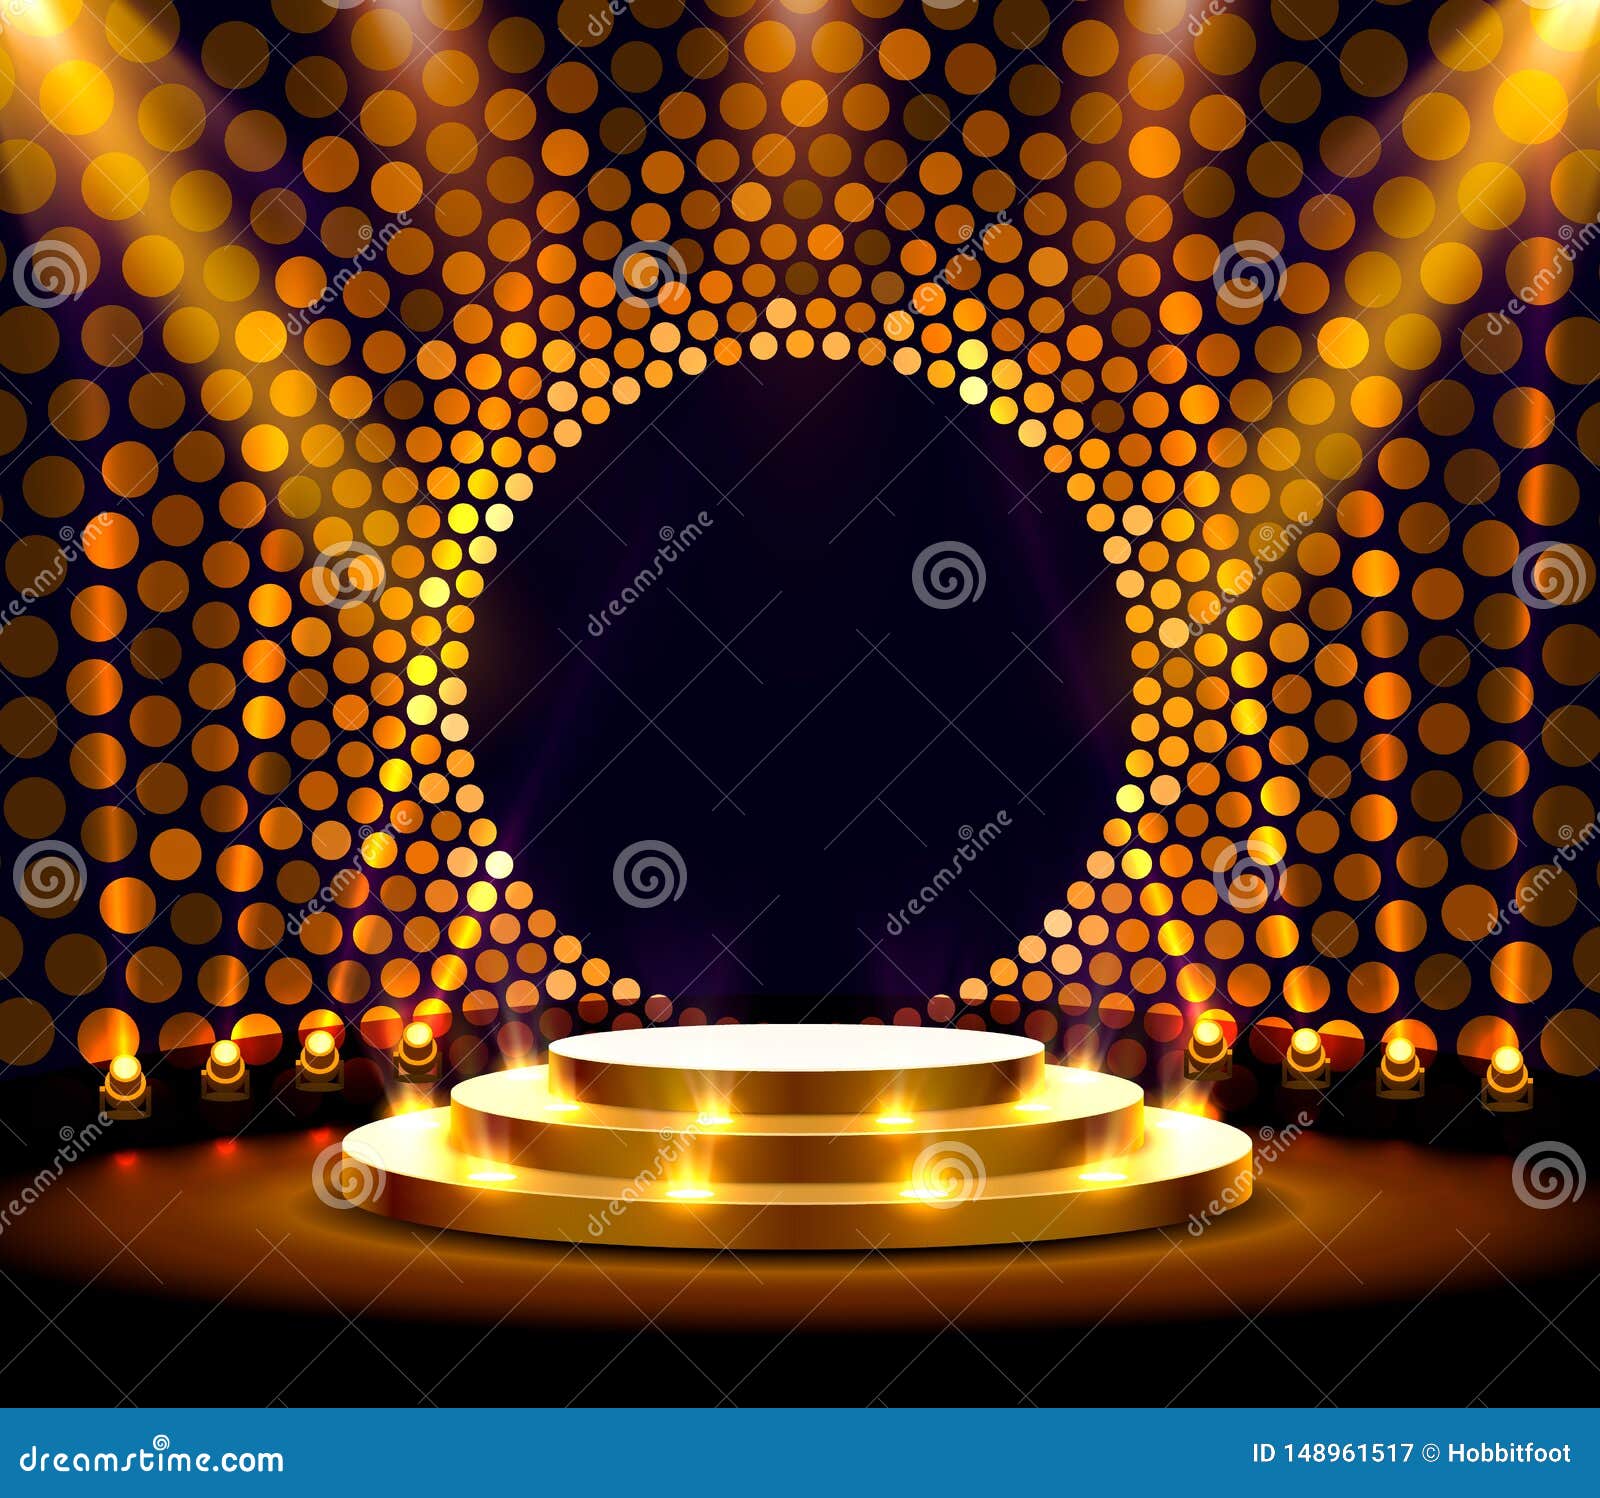 Stage Podium with Lighting, Stage Podium Scene with for Award Ceremony on  Golden Background. Stock Vector - Illustration of decoration, lamp:  148961517